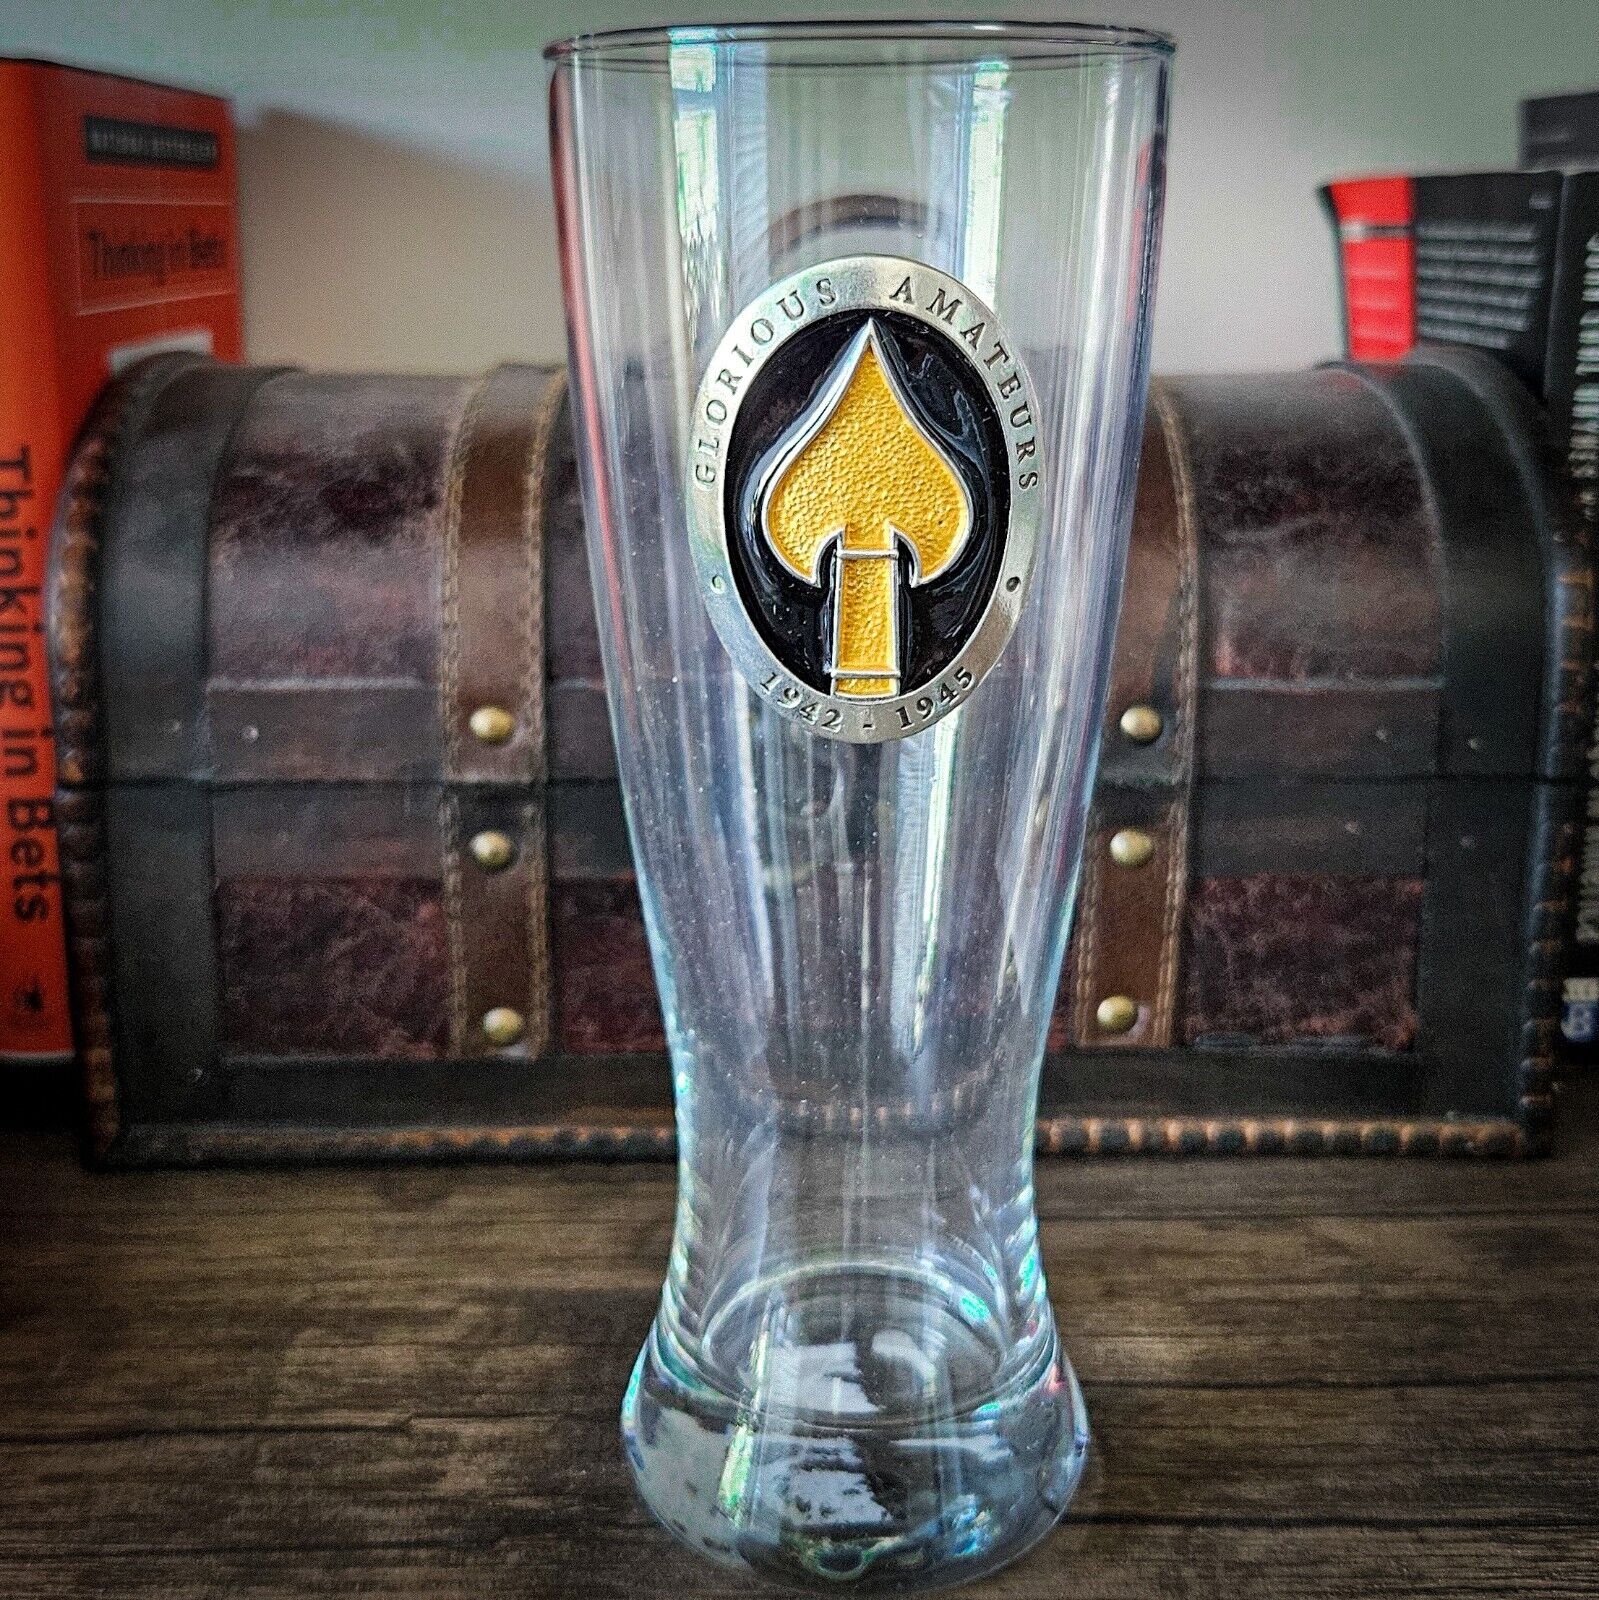 Authentic CIA - OSS Glorious Amateurs Beer Glass, NO Public Release